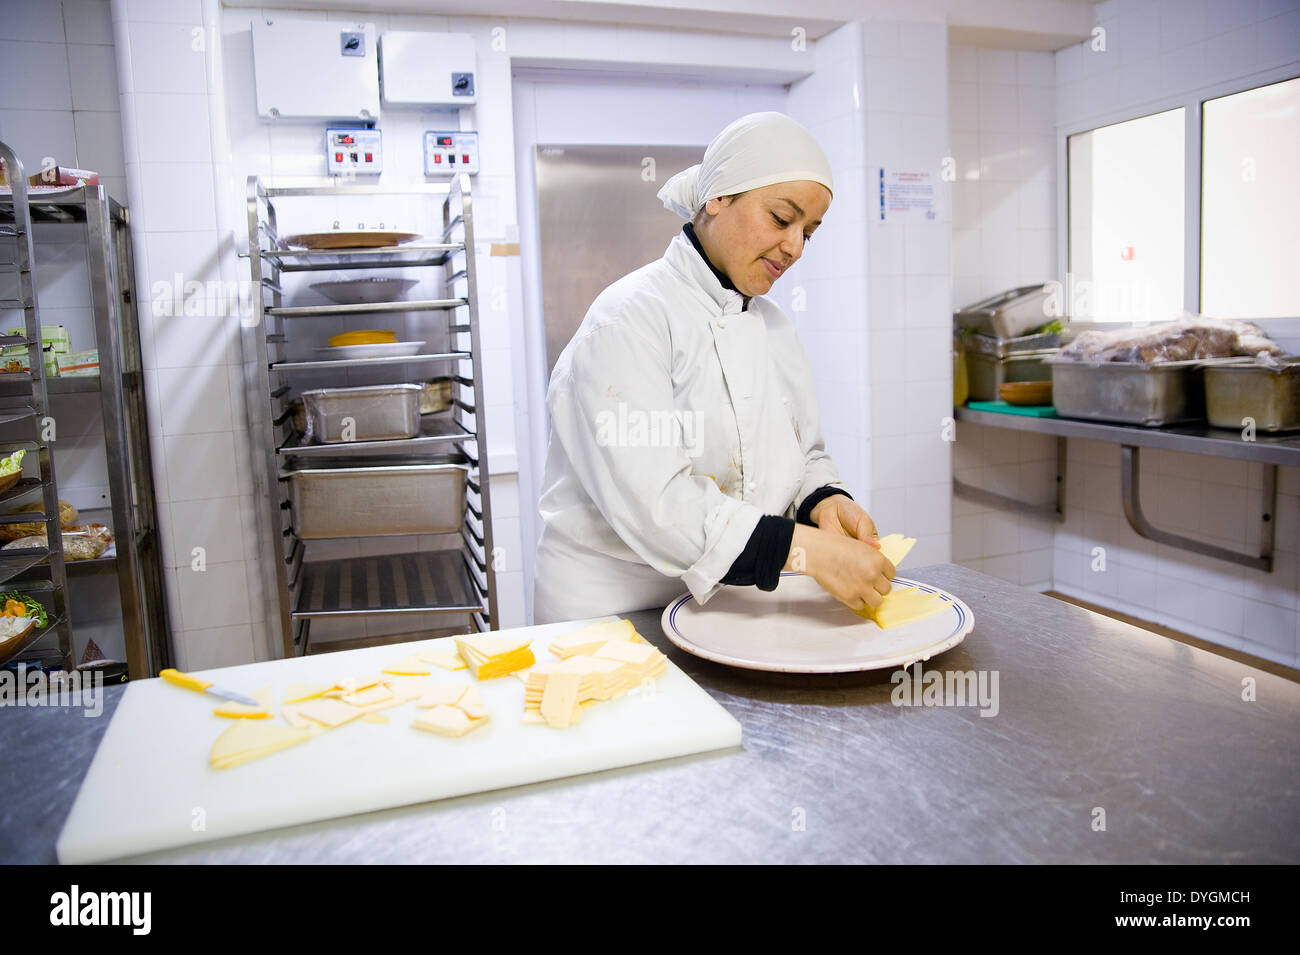 TUNISIA, HAMMAMET: The tourism industry offers lots of jobs,also for women. They work on all levels, like her in the kitchen. Stock Photo